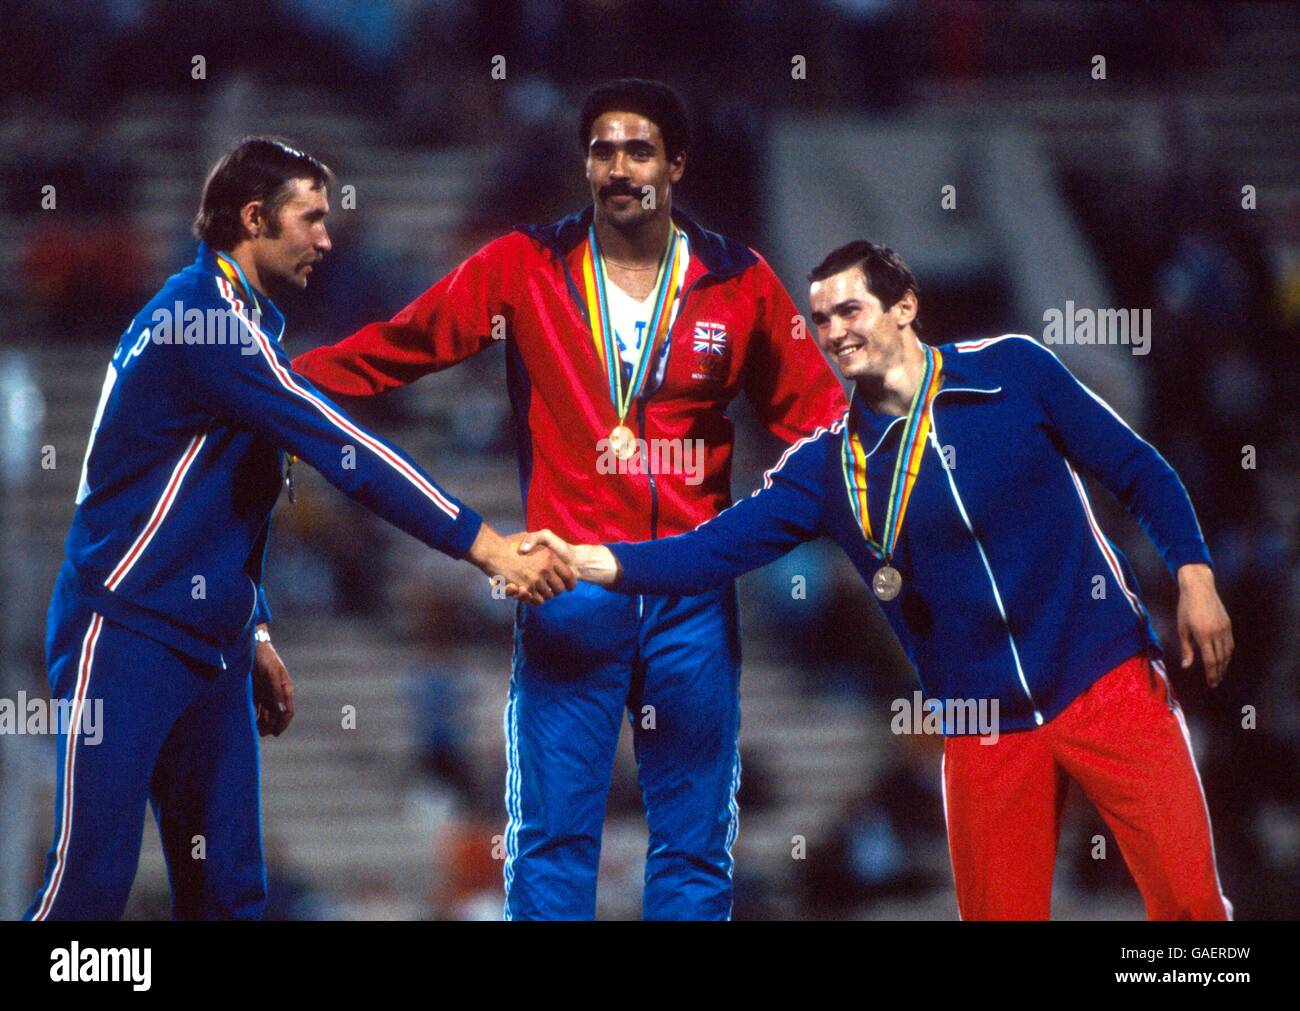 Gold medallist Daley Thompson of Great Britain (c) magnanimously pats USSR's Yuriy Kutsenko (silver, l) and Sergey Zhelanov (bronze, r) on the back as they shake hands Stock Photo